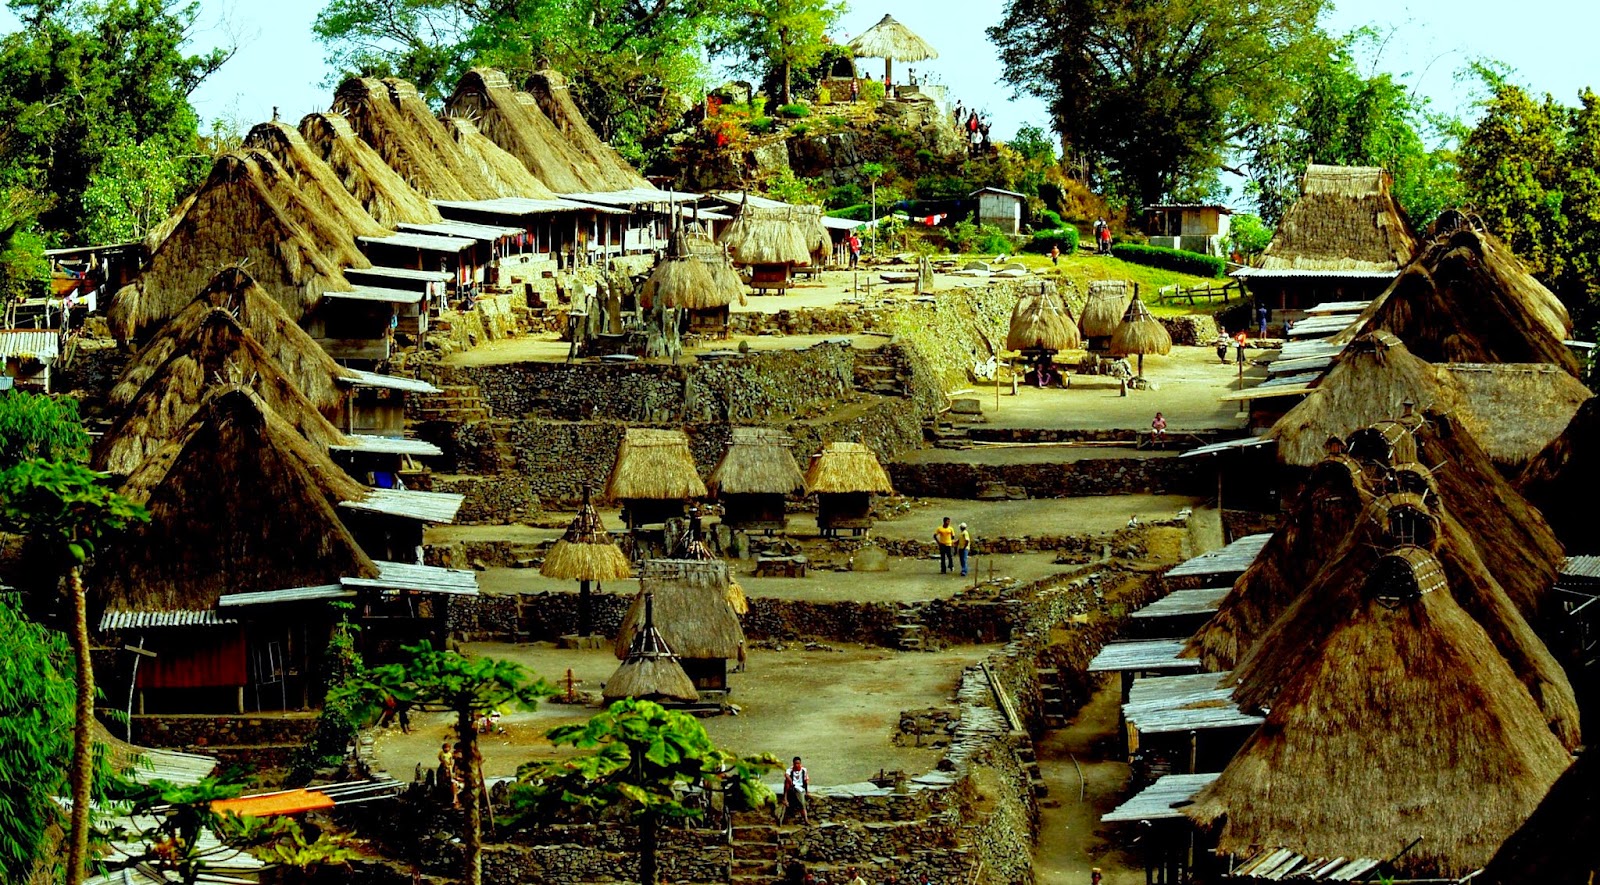 Kampung Bena, where ancient megalithic traditions continue